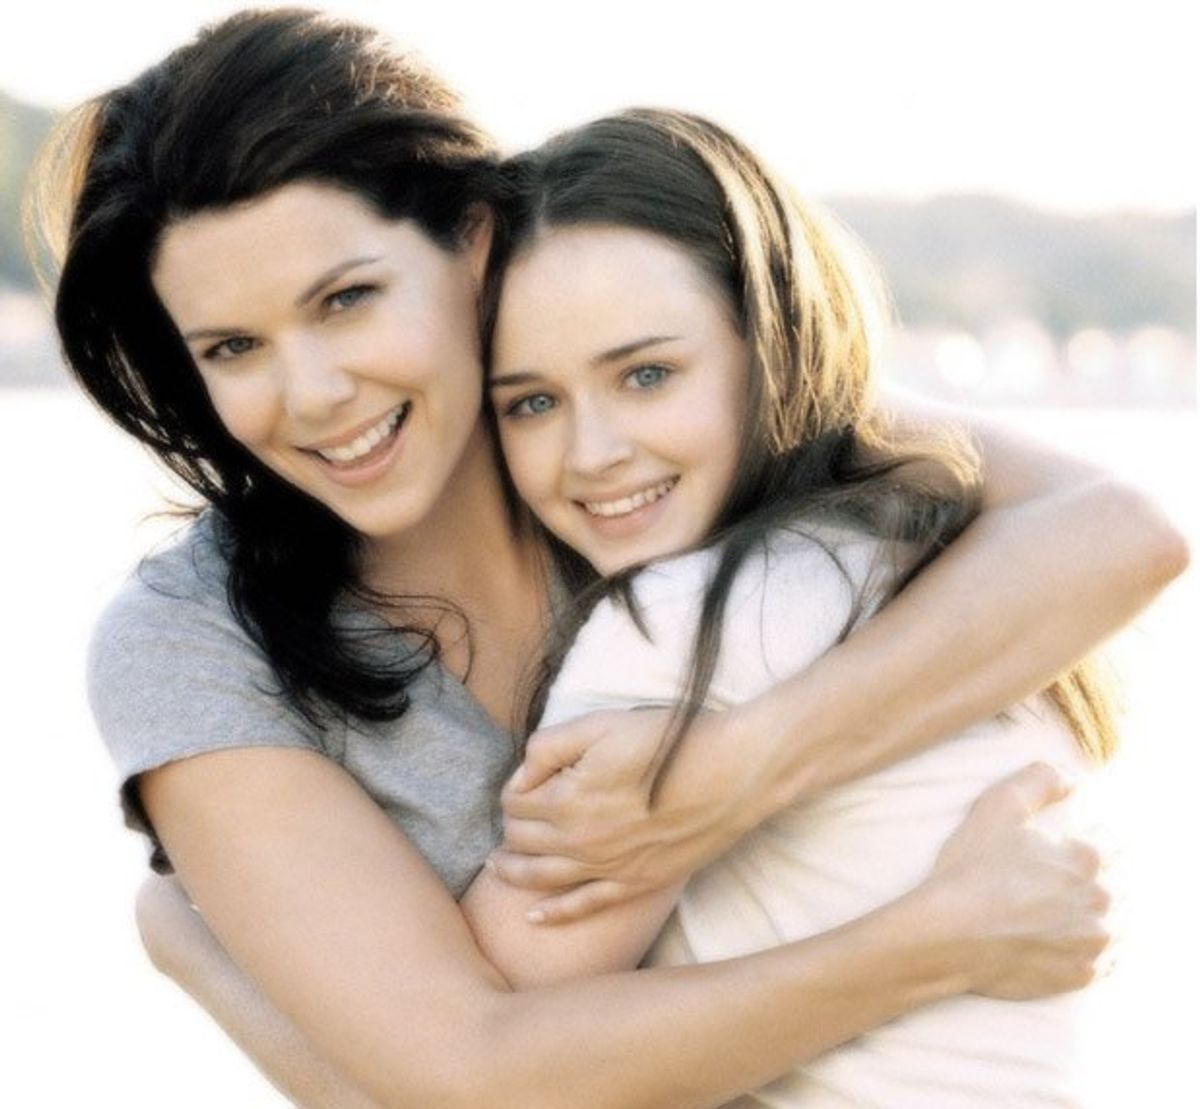 12 Reasons Why Your Mom Should Be Your Best Friend